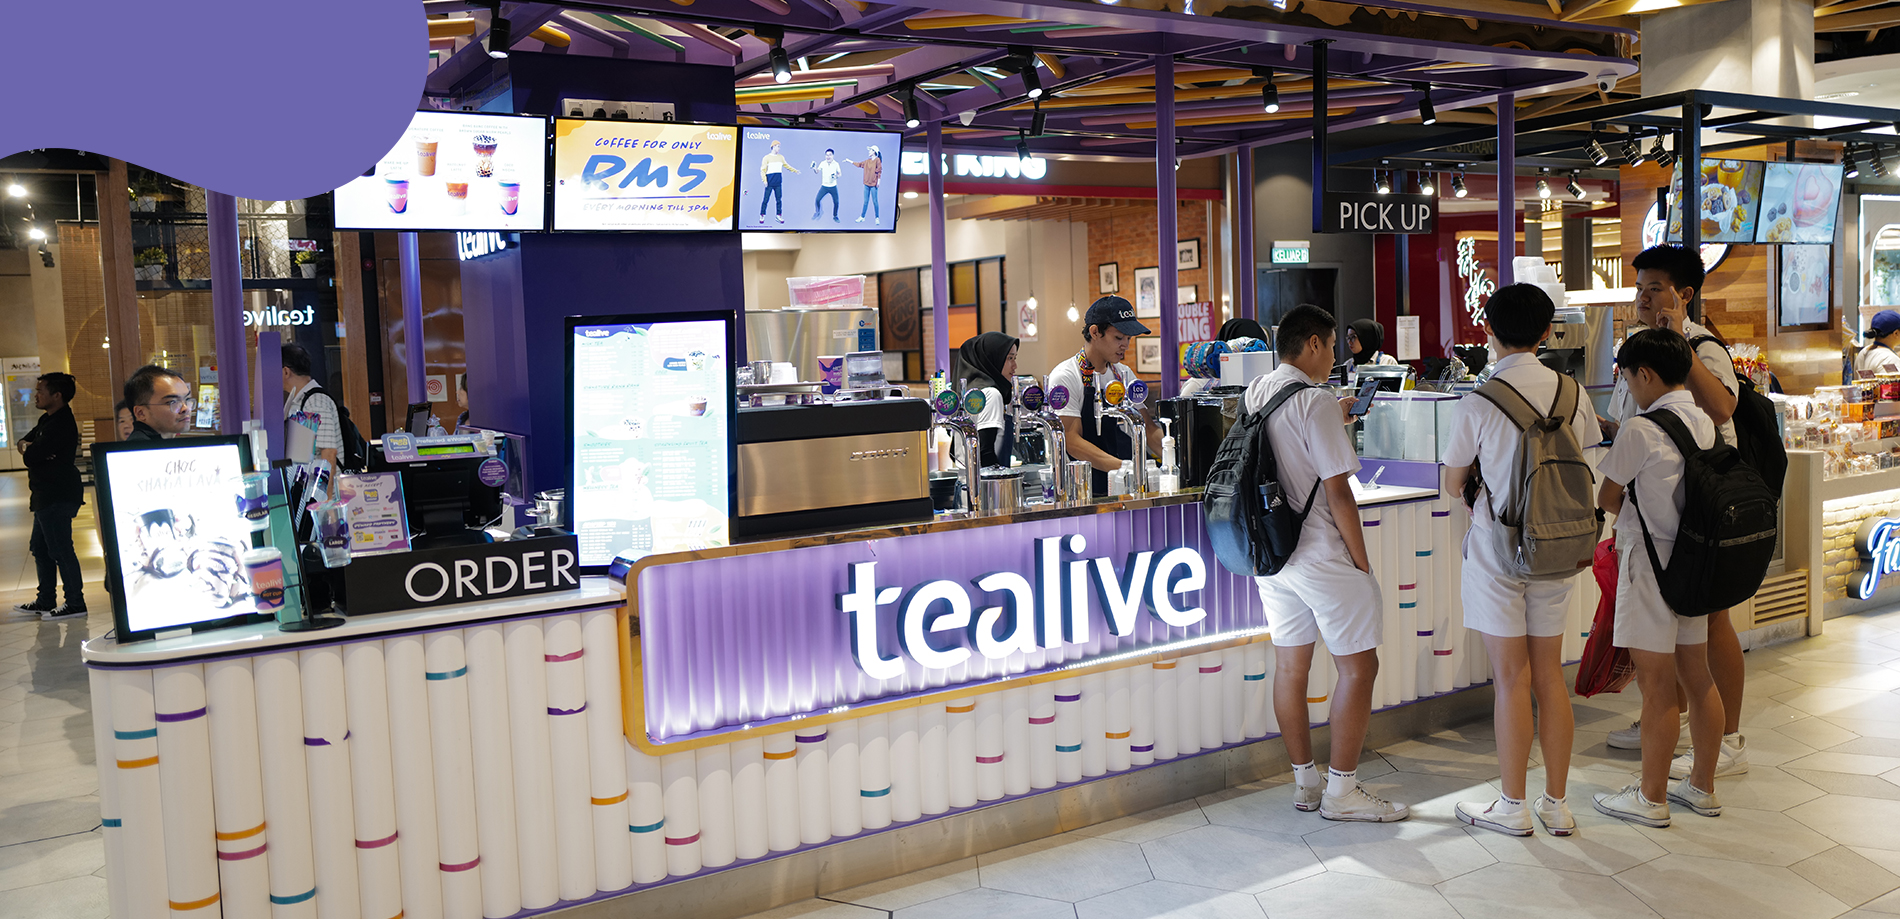 Fees tealive malaysia franchise How Much